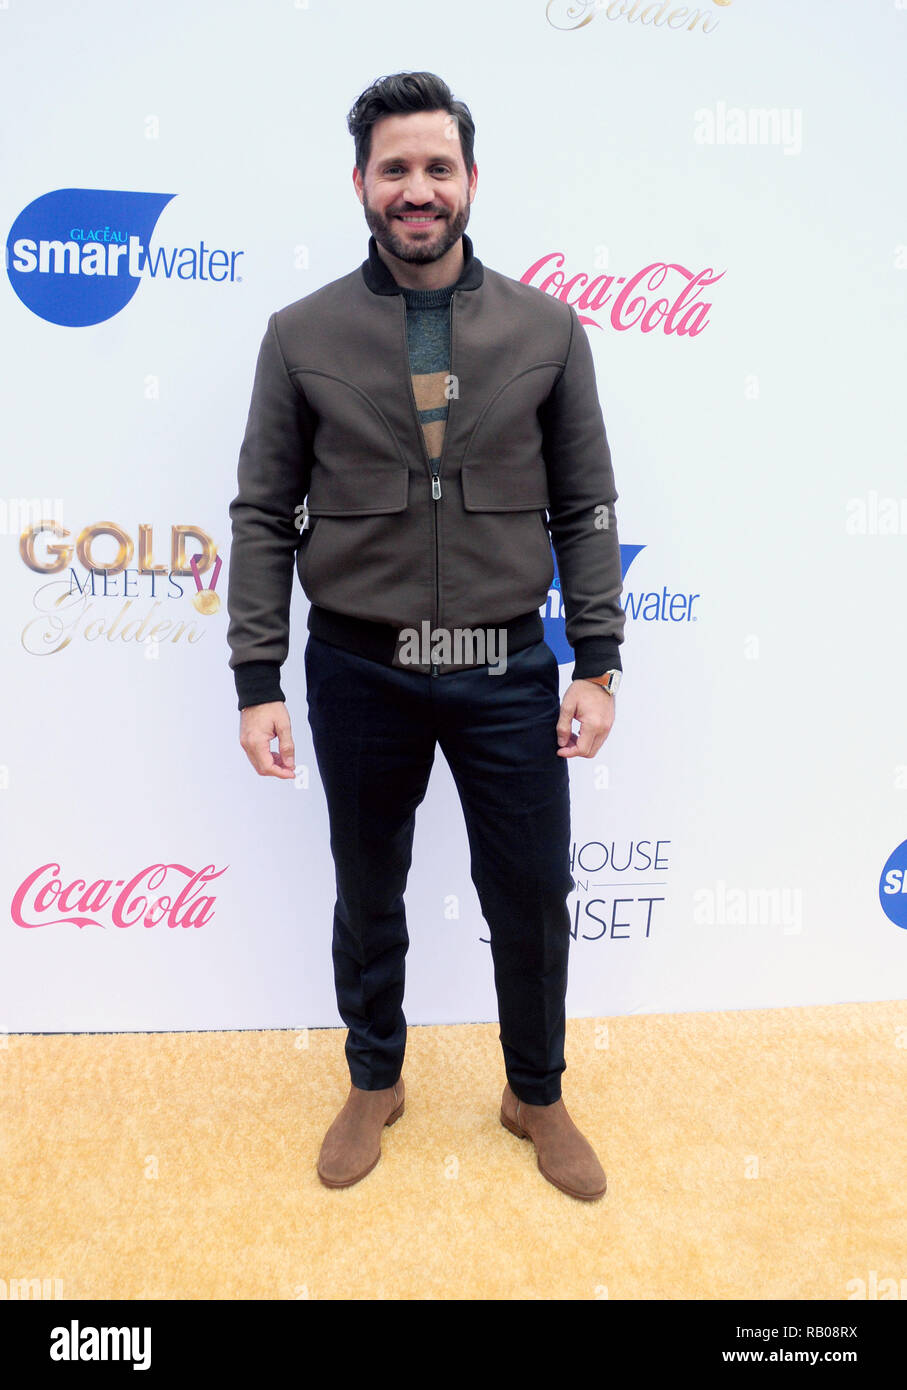 California, USA. 5th Jan 2019. Actor Edgar Ramirez attends the 6th Annual  Gold Meets Golden hosted by Nicole Kidman and Nadia Comaneci on January 5,  2019 at The House on Sunset in